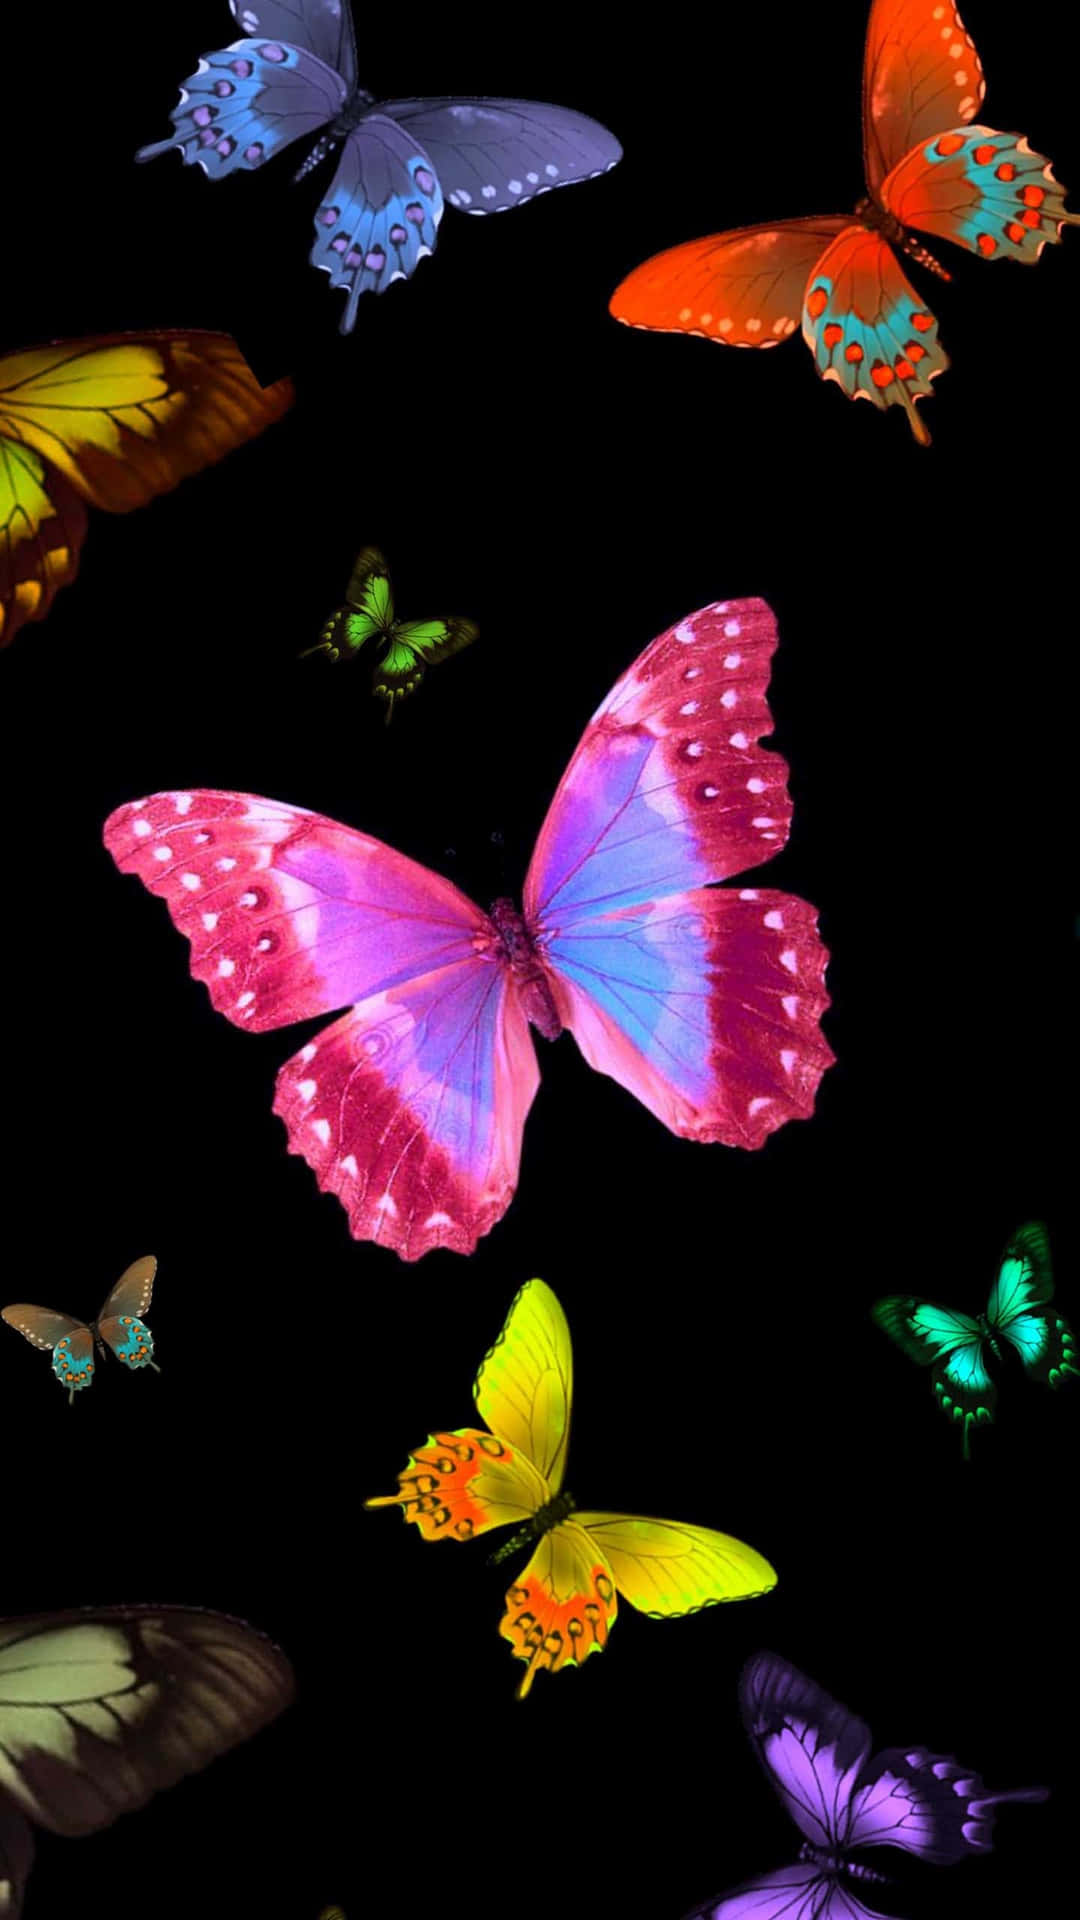 Aesthetic Intricacy Of A Butterfly Wallpaper